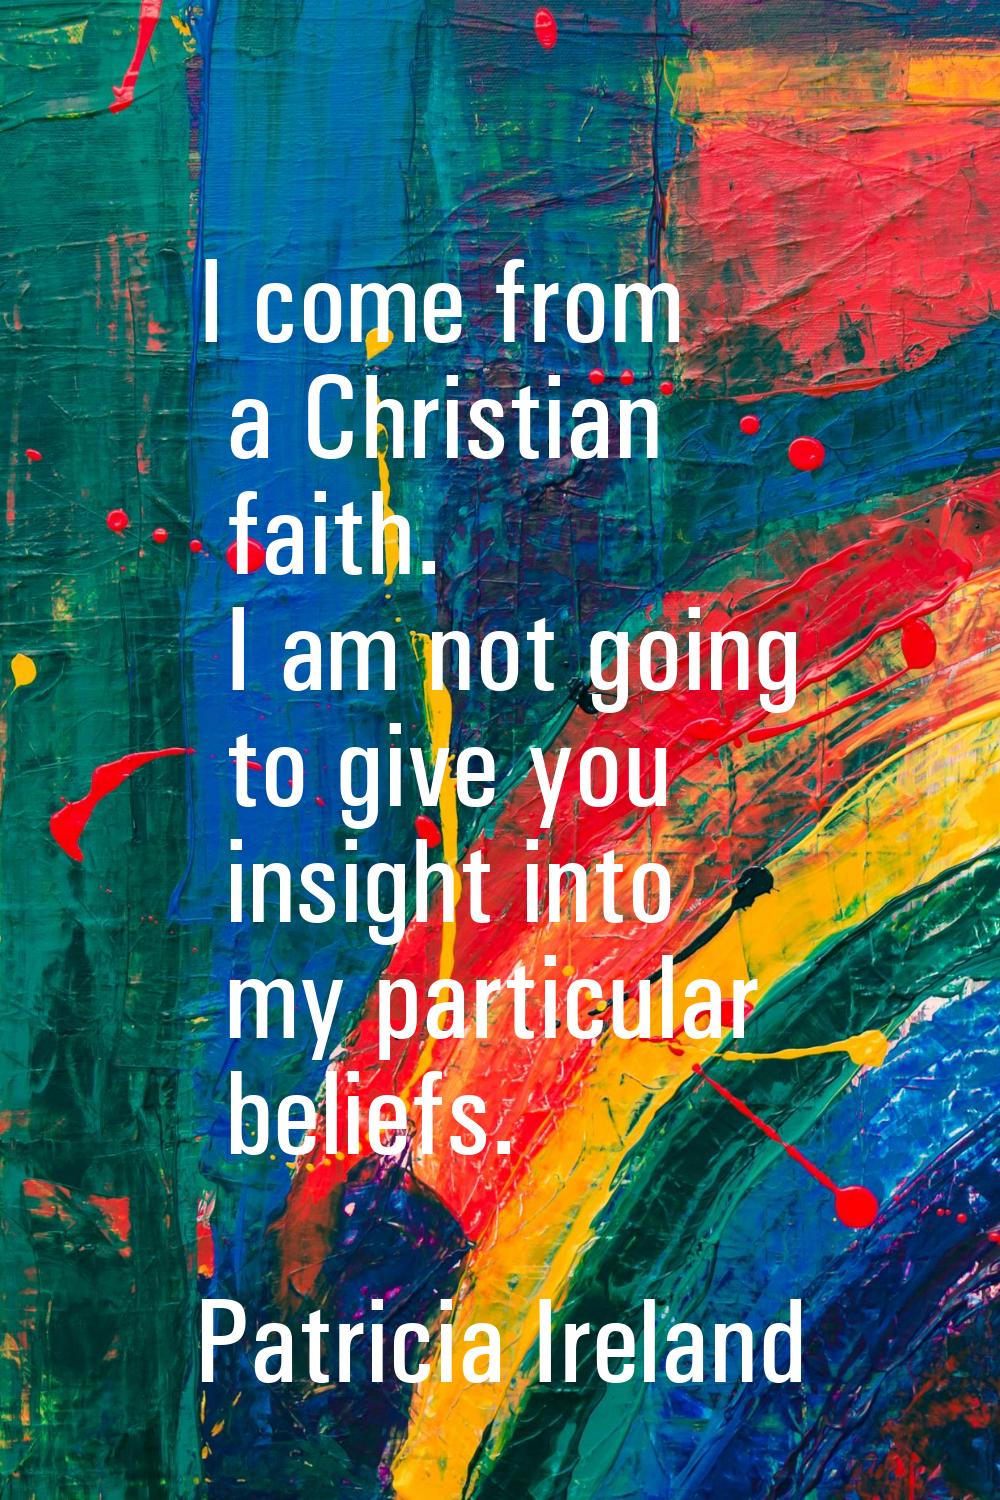 I come from a Christian faith. I am not going to give you insight into my particular beliefs.